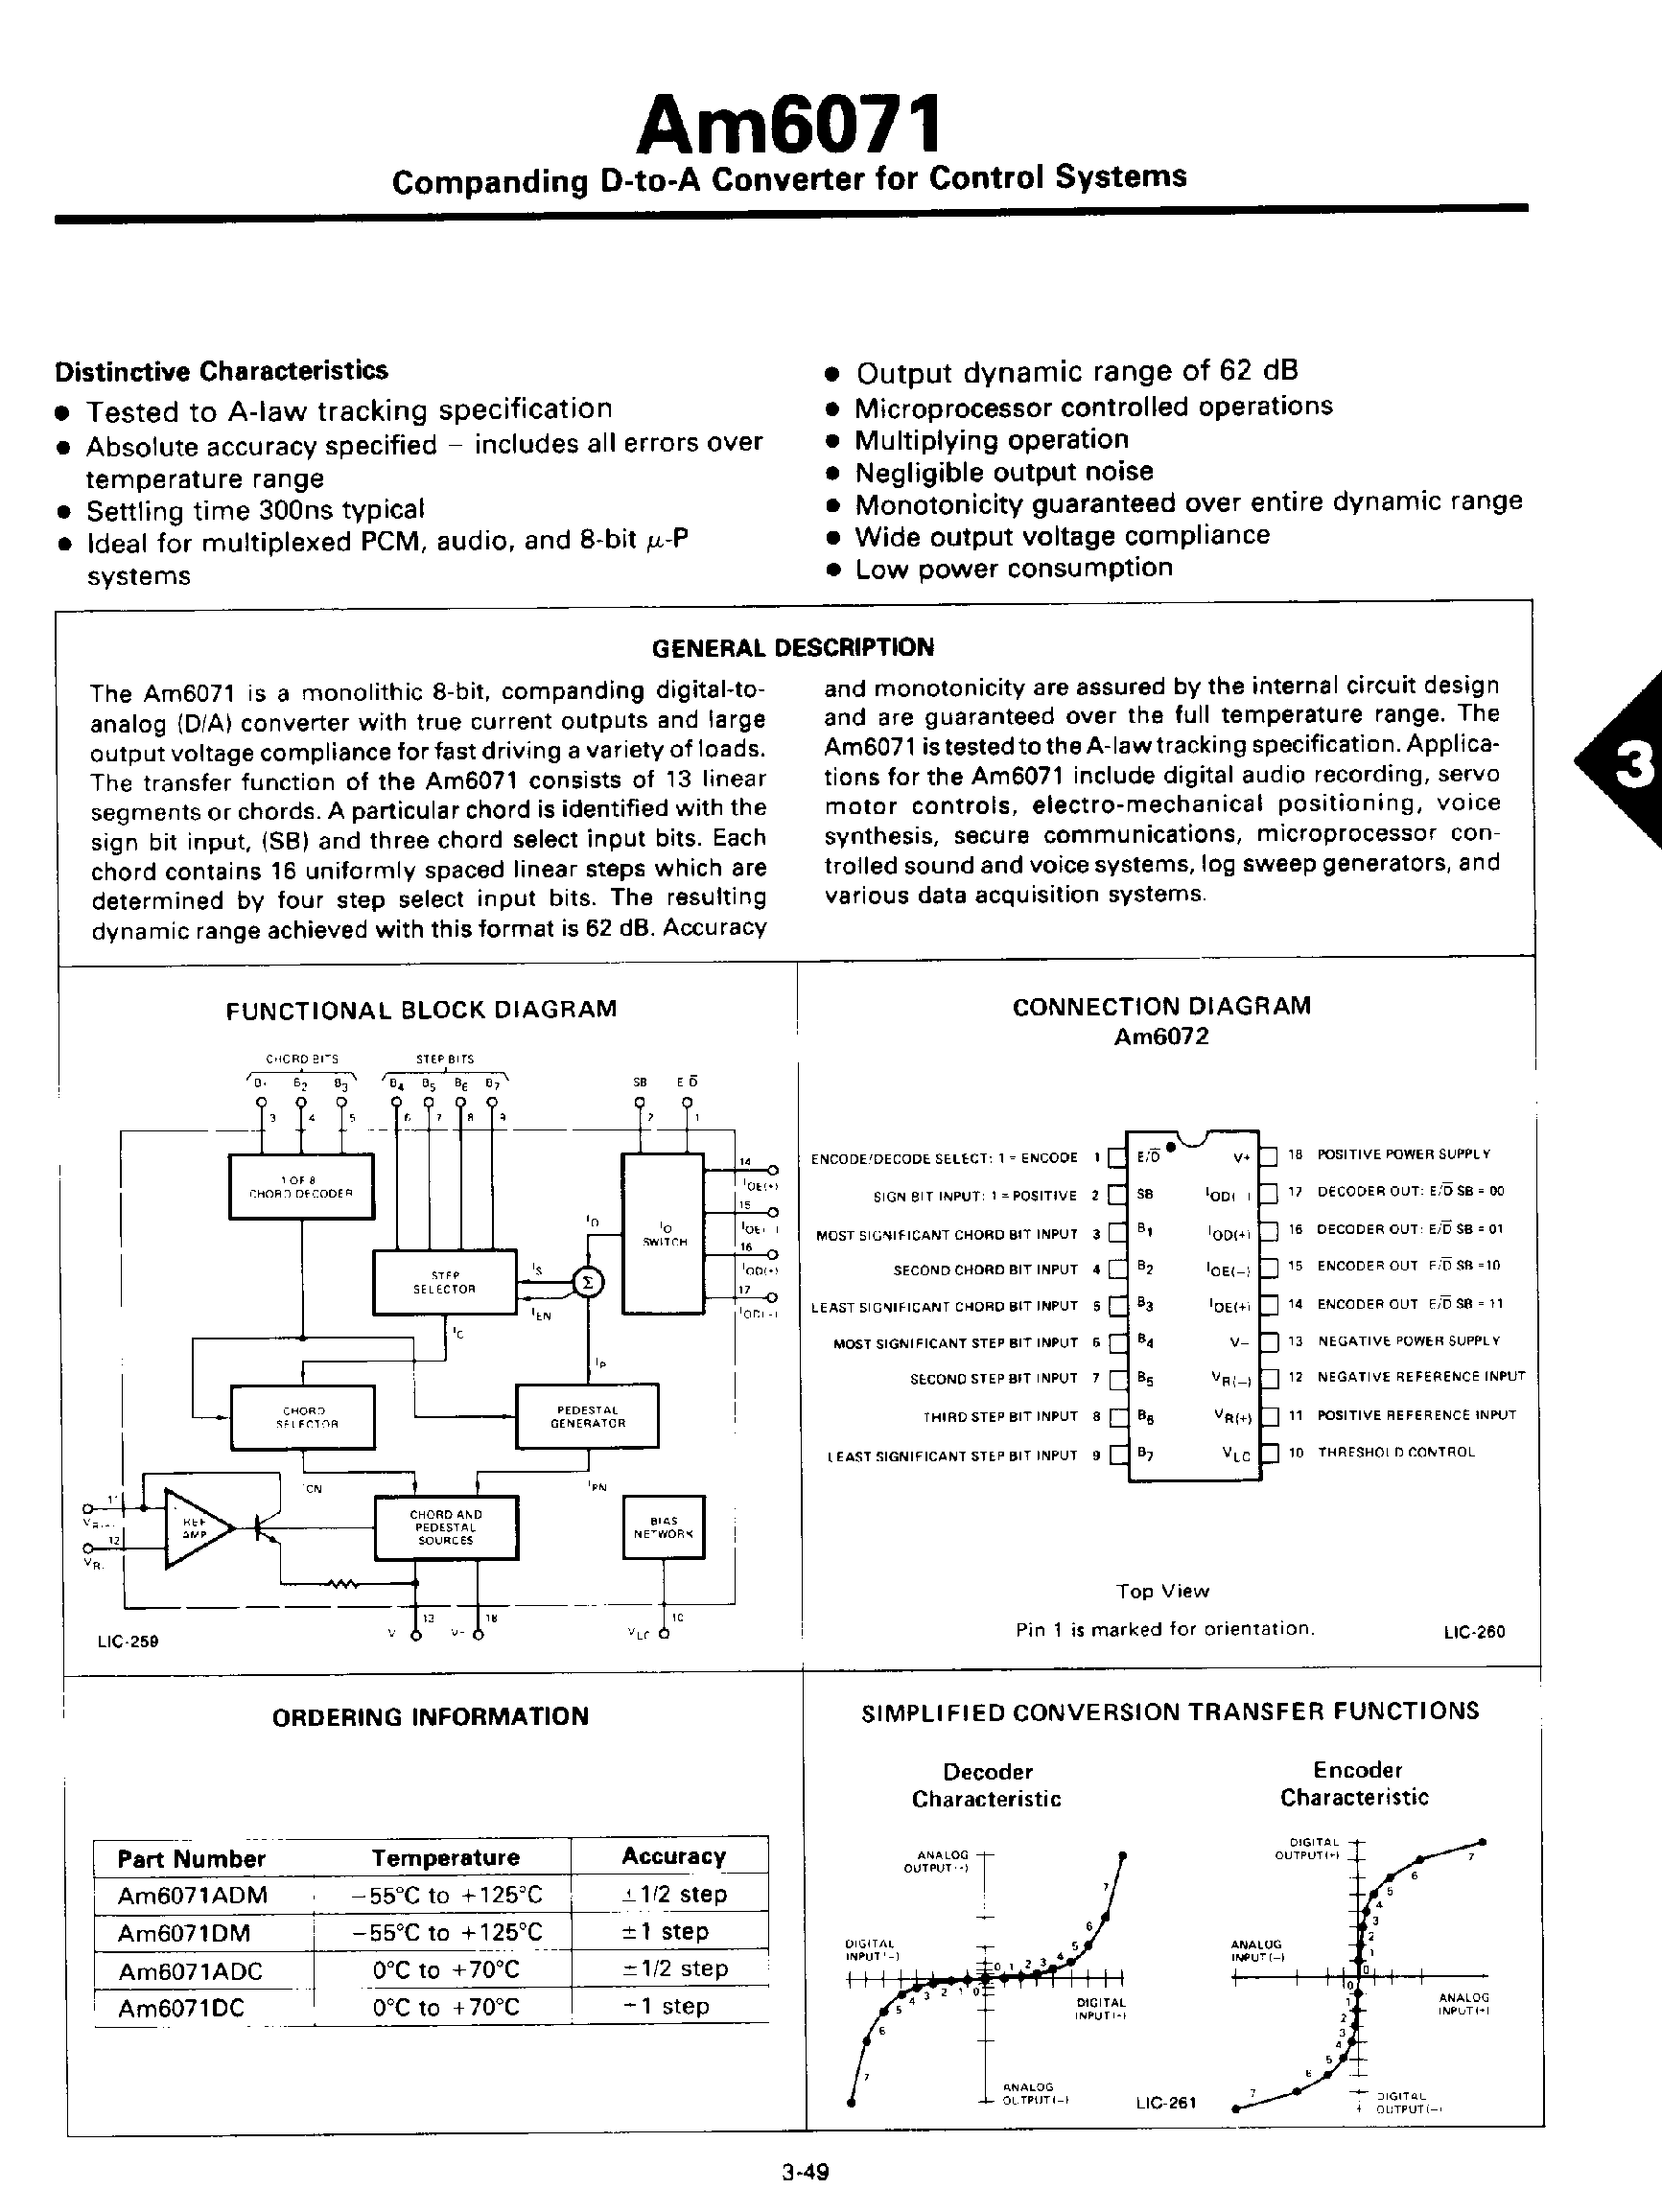 Даташит AM6071 - Companding D-to-A Converter for Control System страница 1